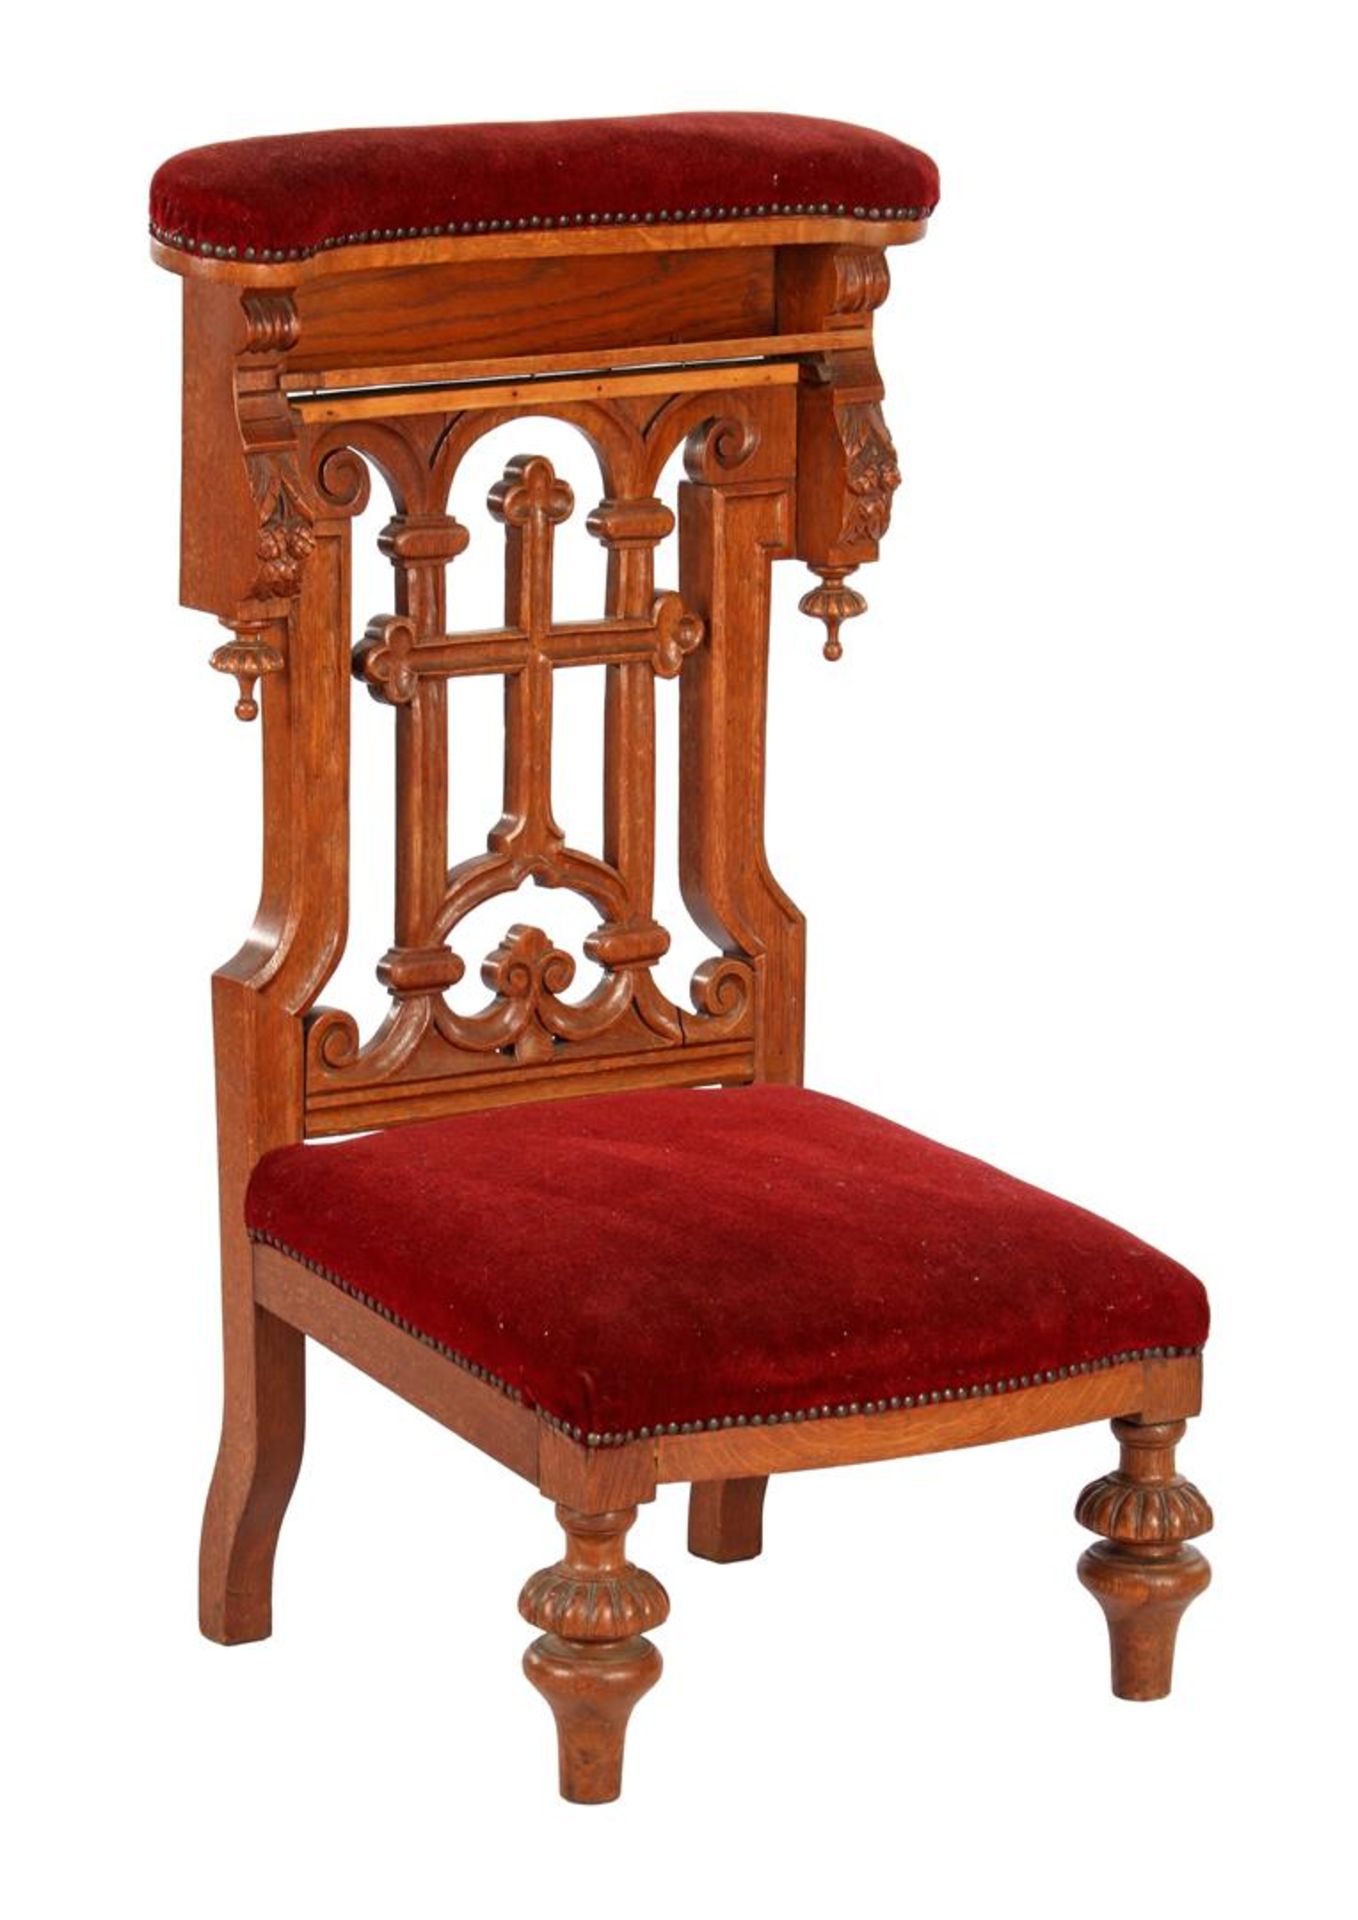 Oak decorated prayer chair with red velvet upholstery